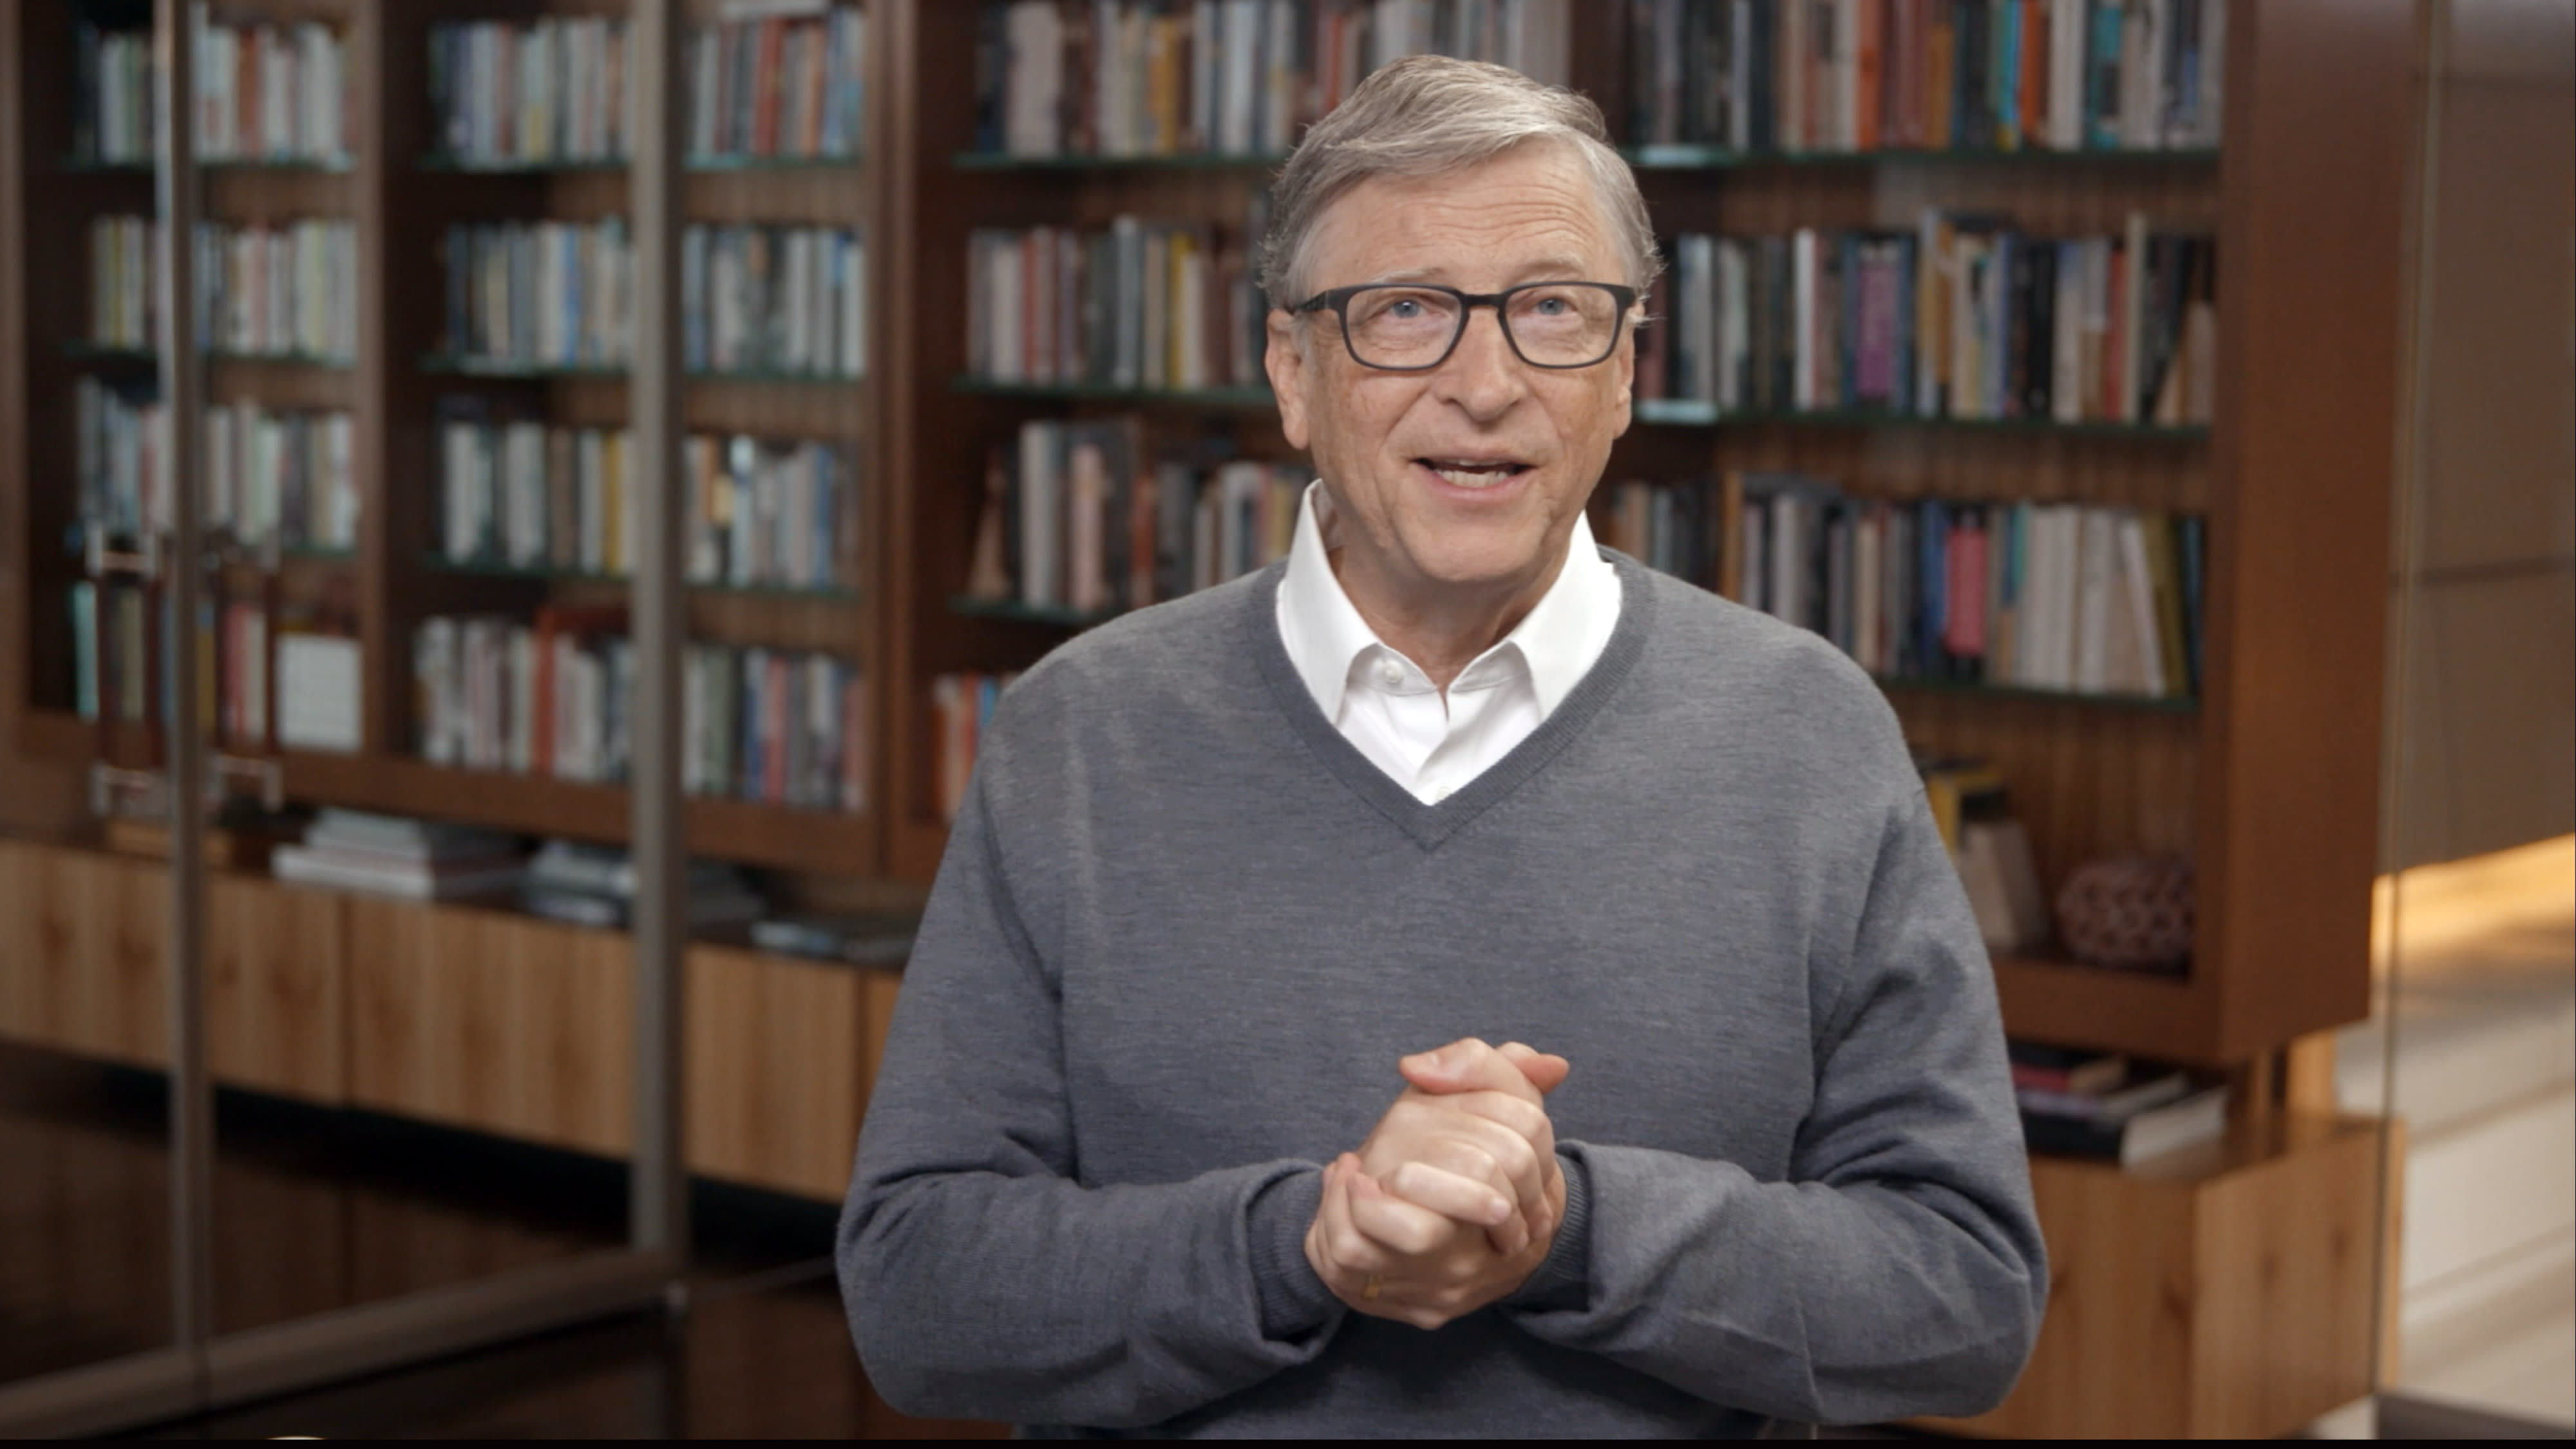 Bill Gates' top goal in 2022: Ensuring 'Covid-19 is the last pandemic'